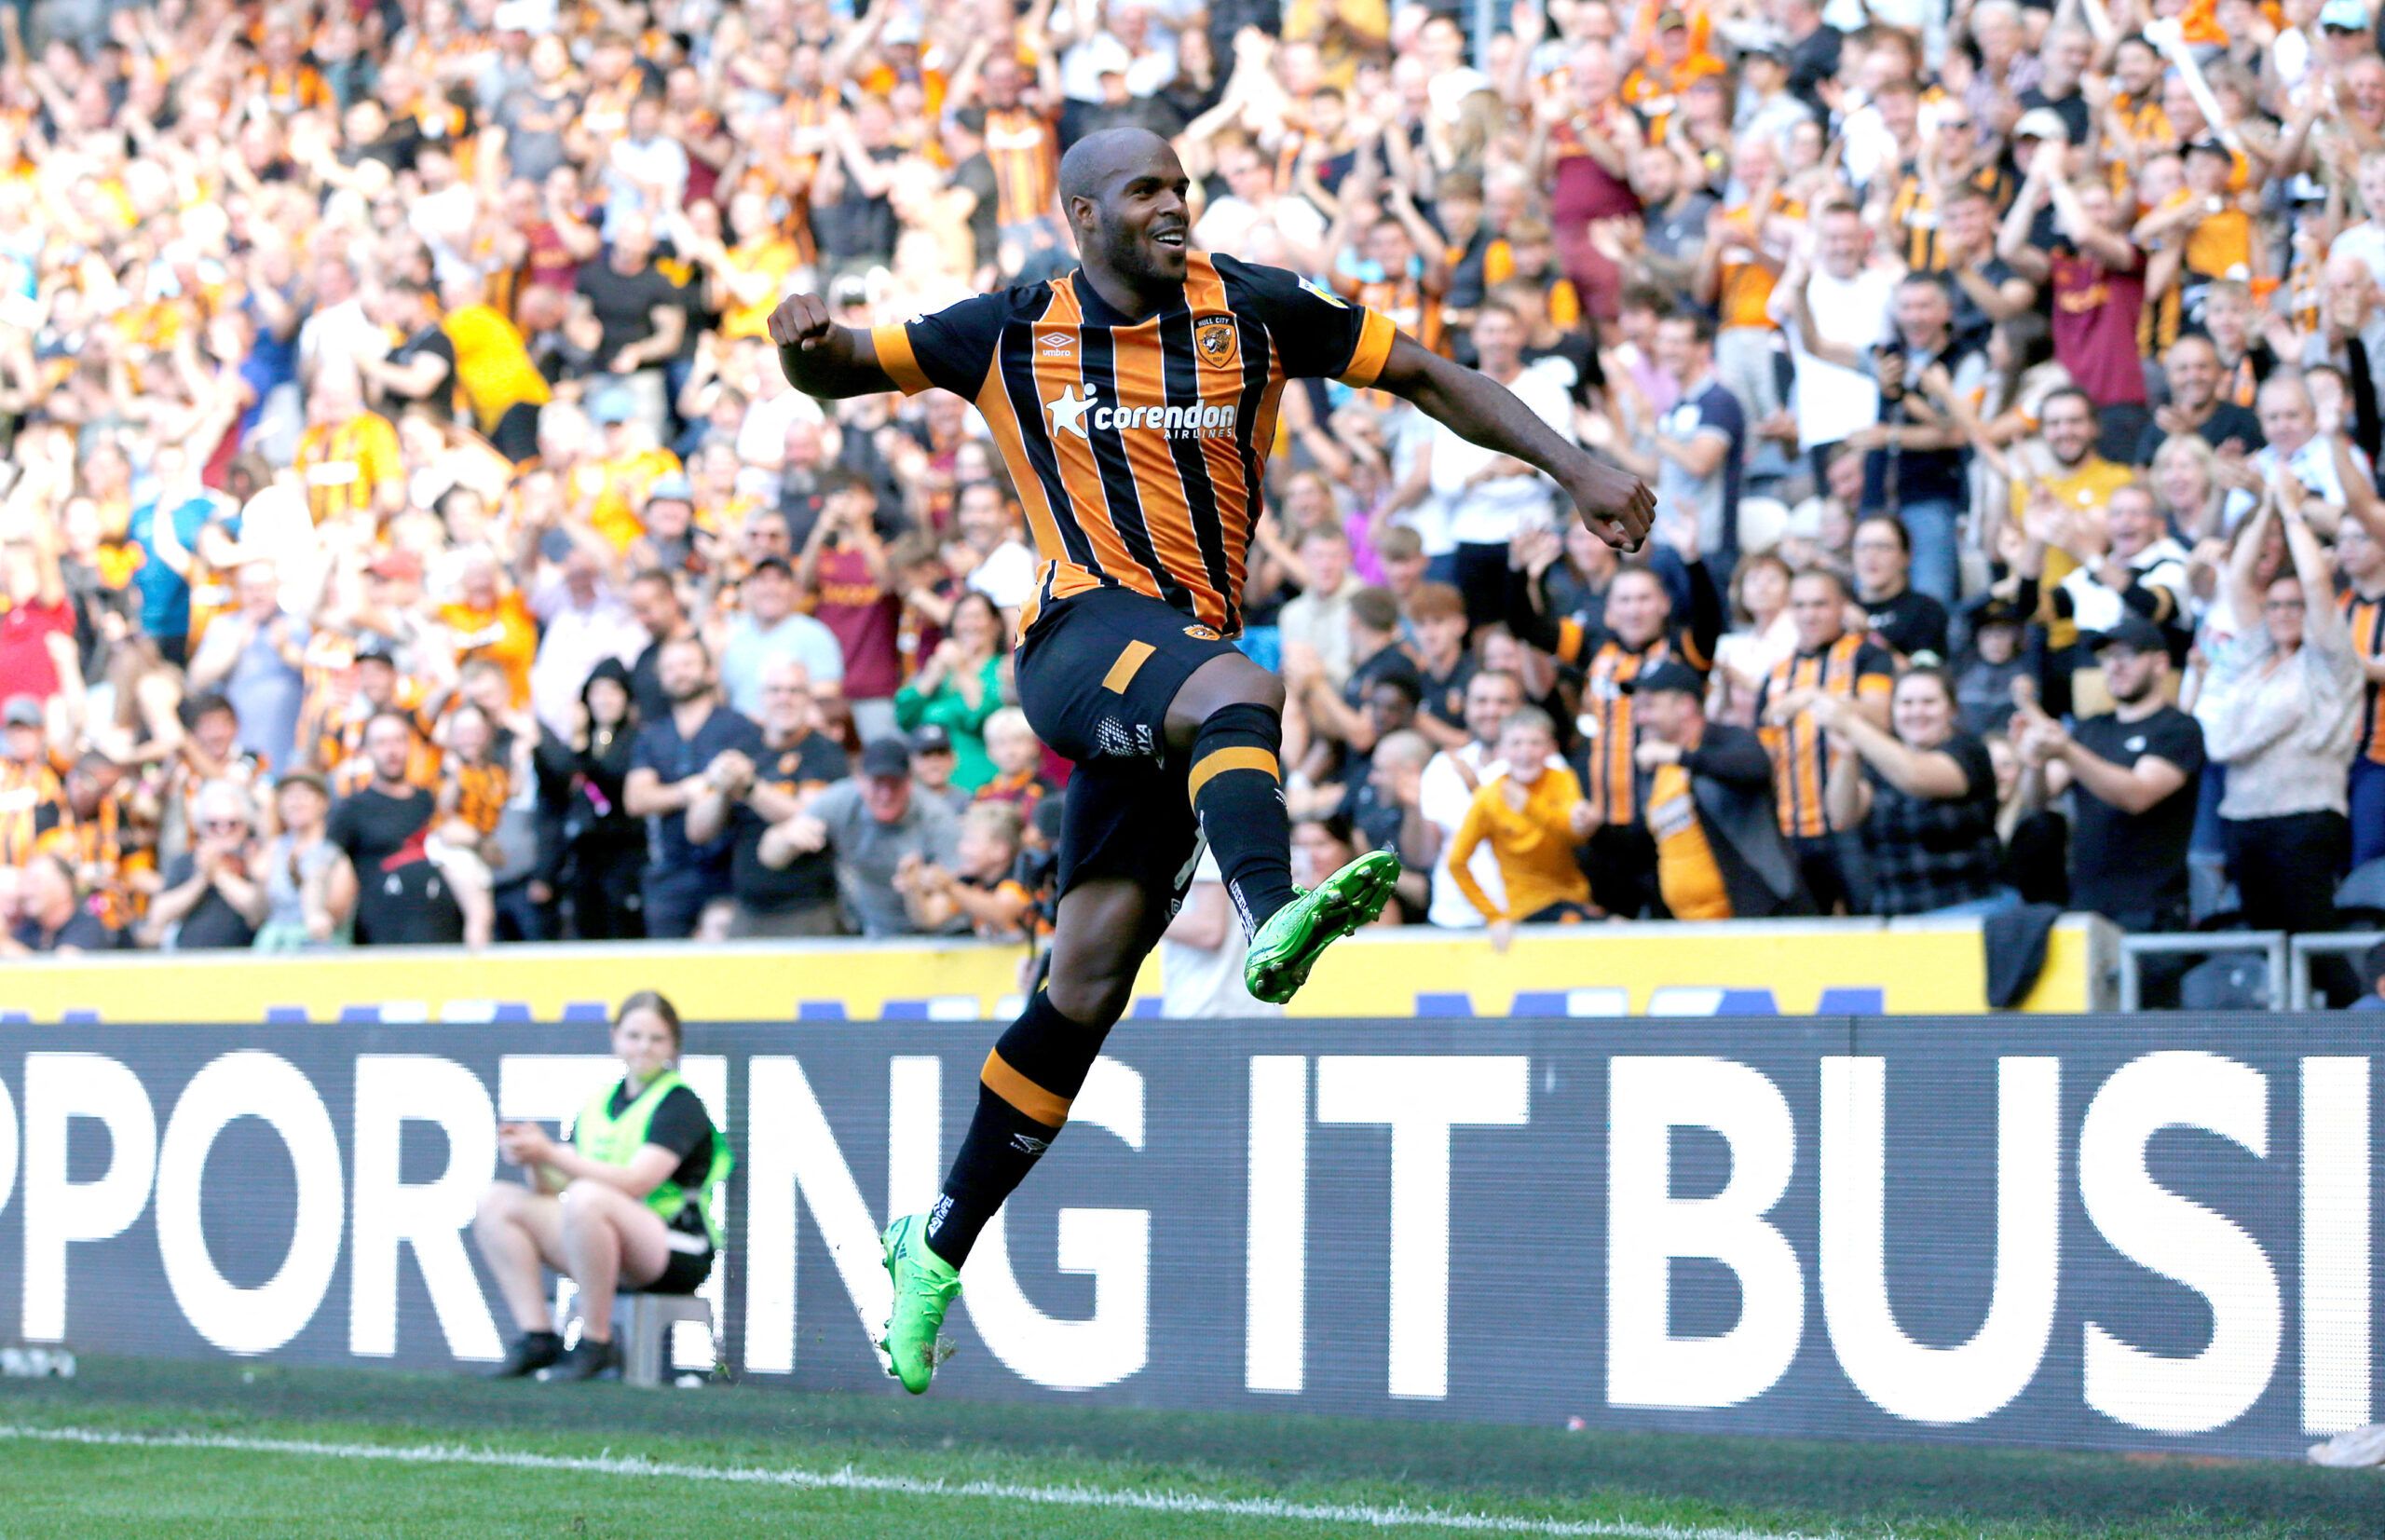 Soccer Football - Championship - Hull City v Coventry City - MKM Stadium, Hull, Britain - August 27, 2022 Hull City's Oscar Estupinan celebrates scoring their third goal to complete his hat-trick Action Images/Ed Sykes EDITORIAL USE ONLY. No use with unauthorized audio, video, data, fixture lists, club/league logos or 